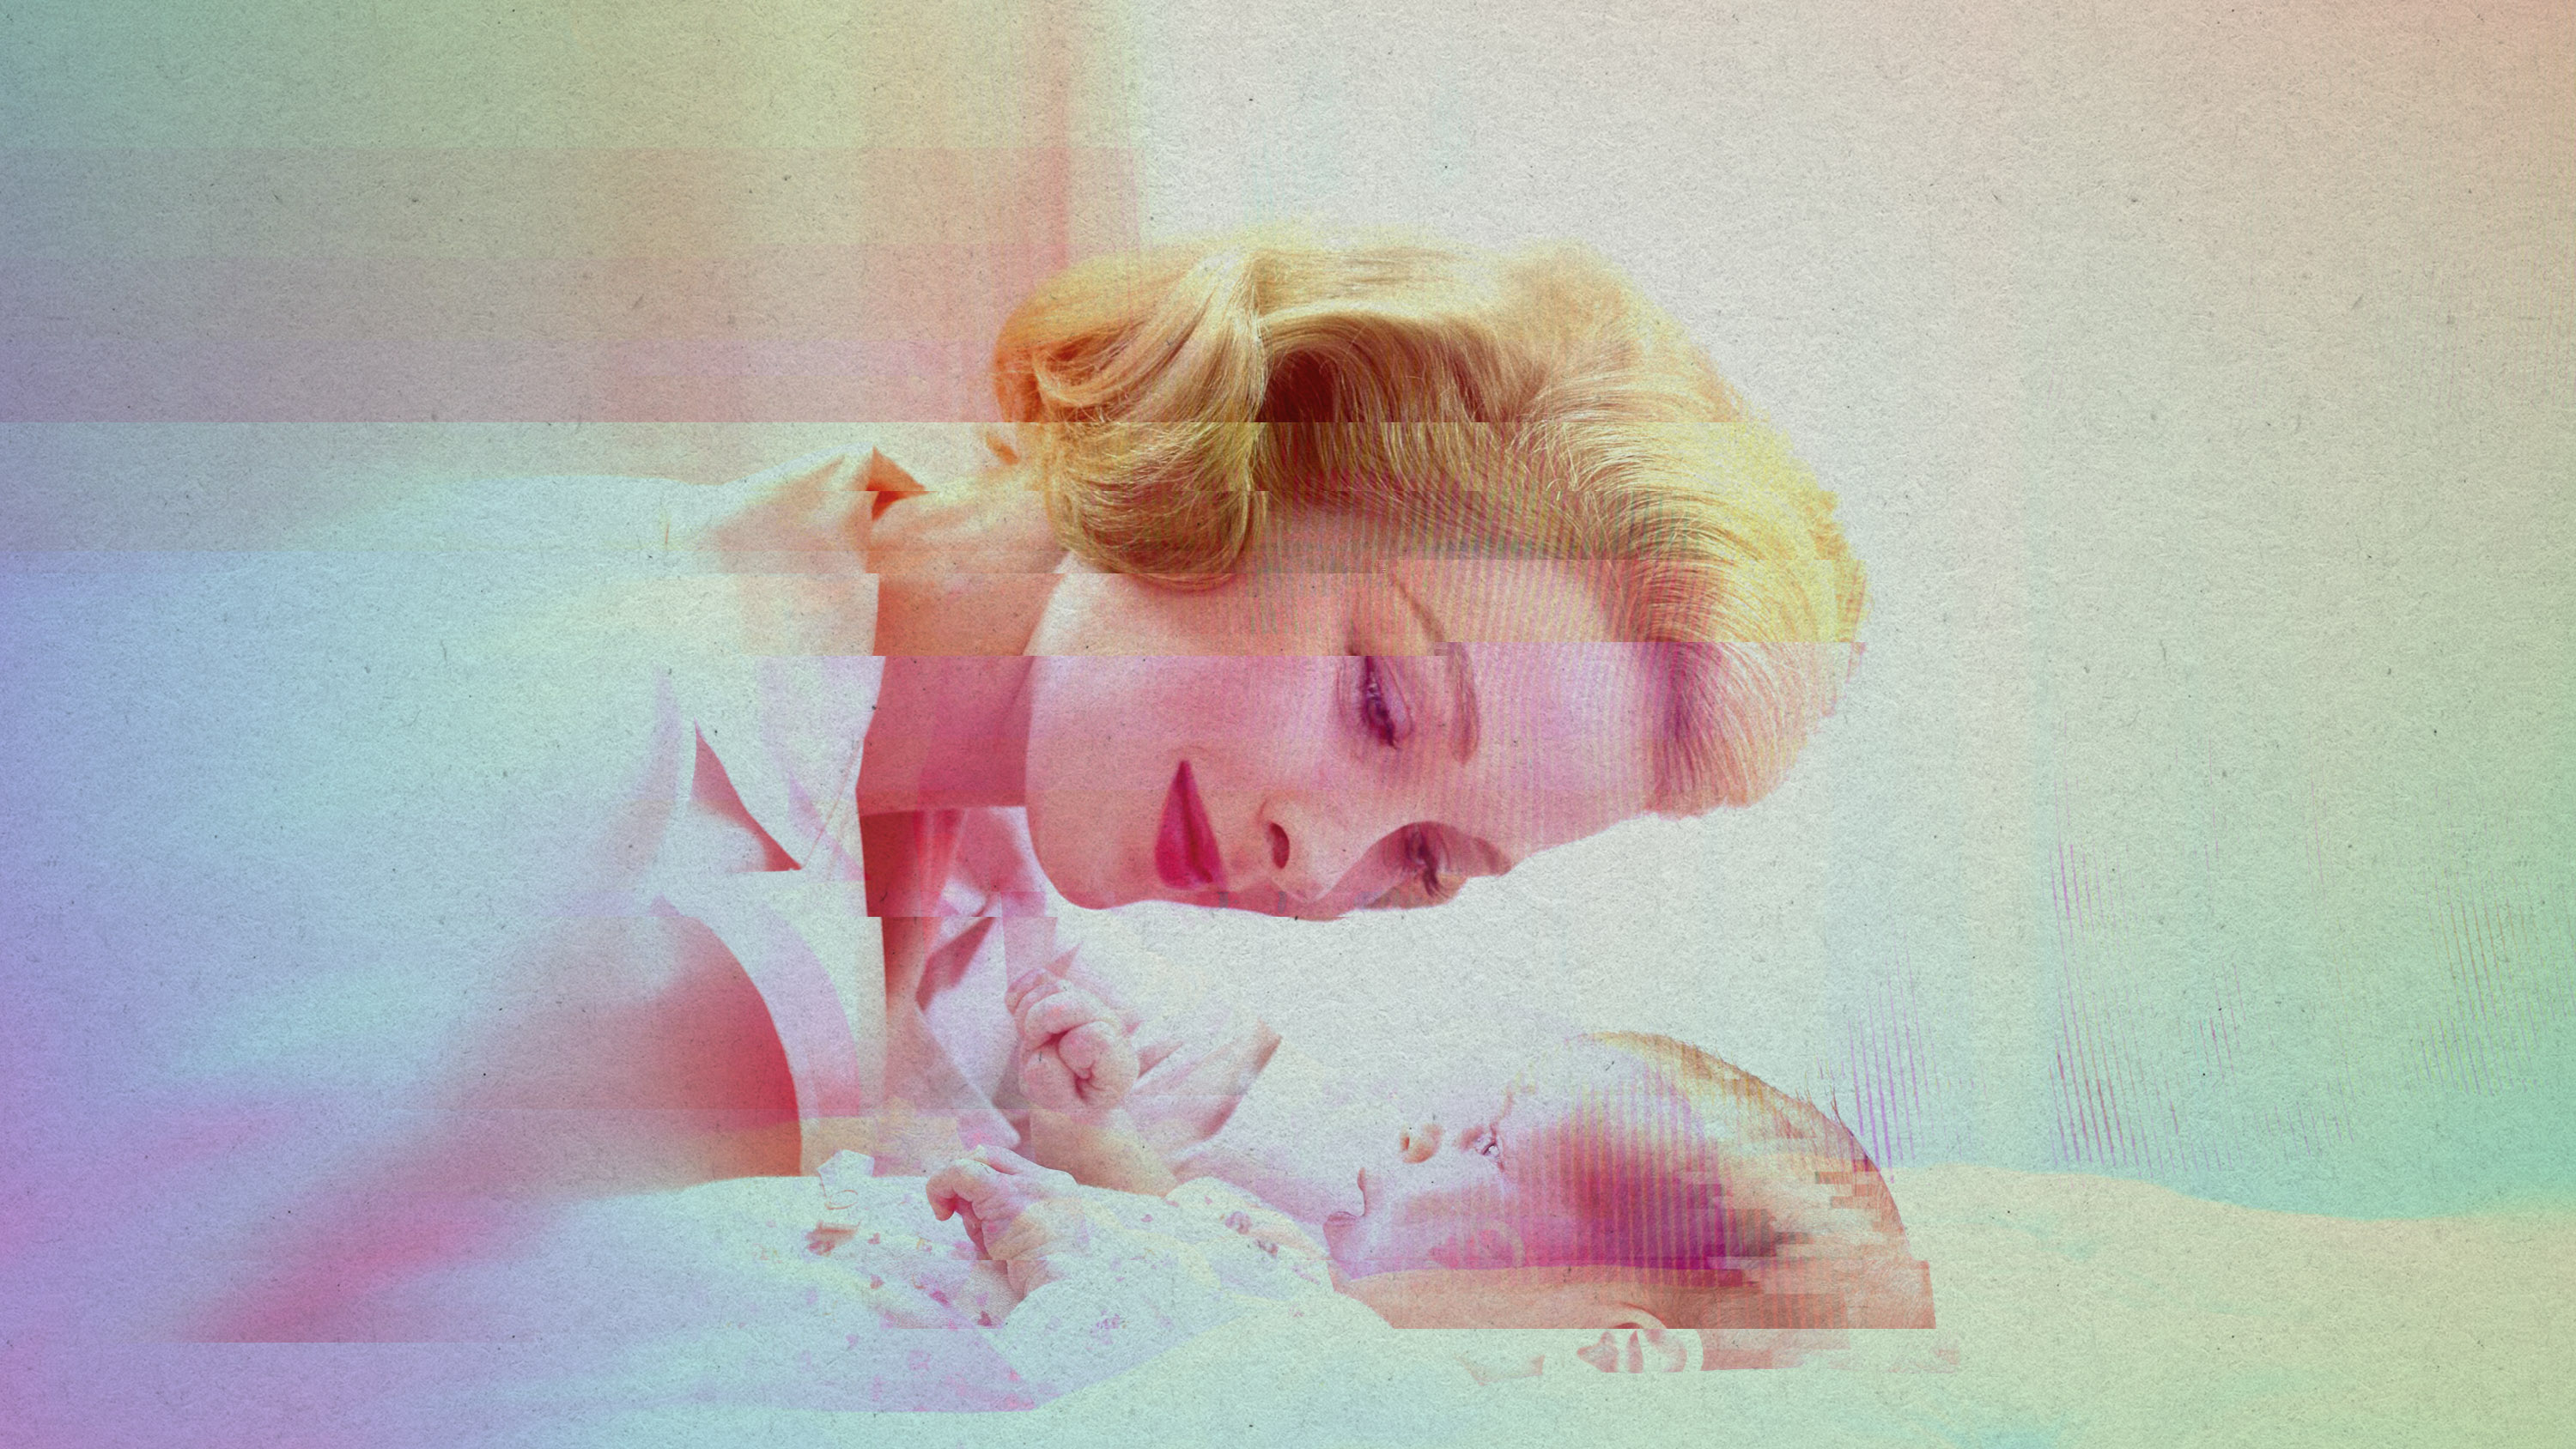 glitch effect on a 1950's era image of a mother smiling at an infant son